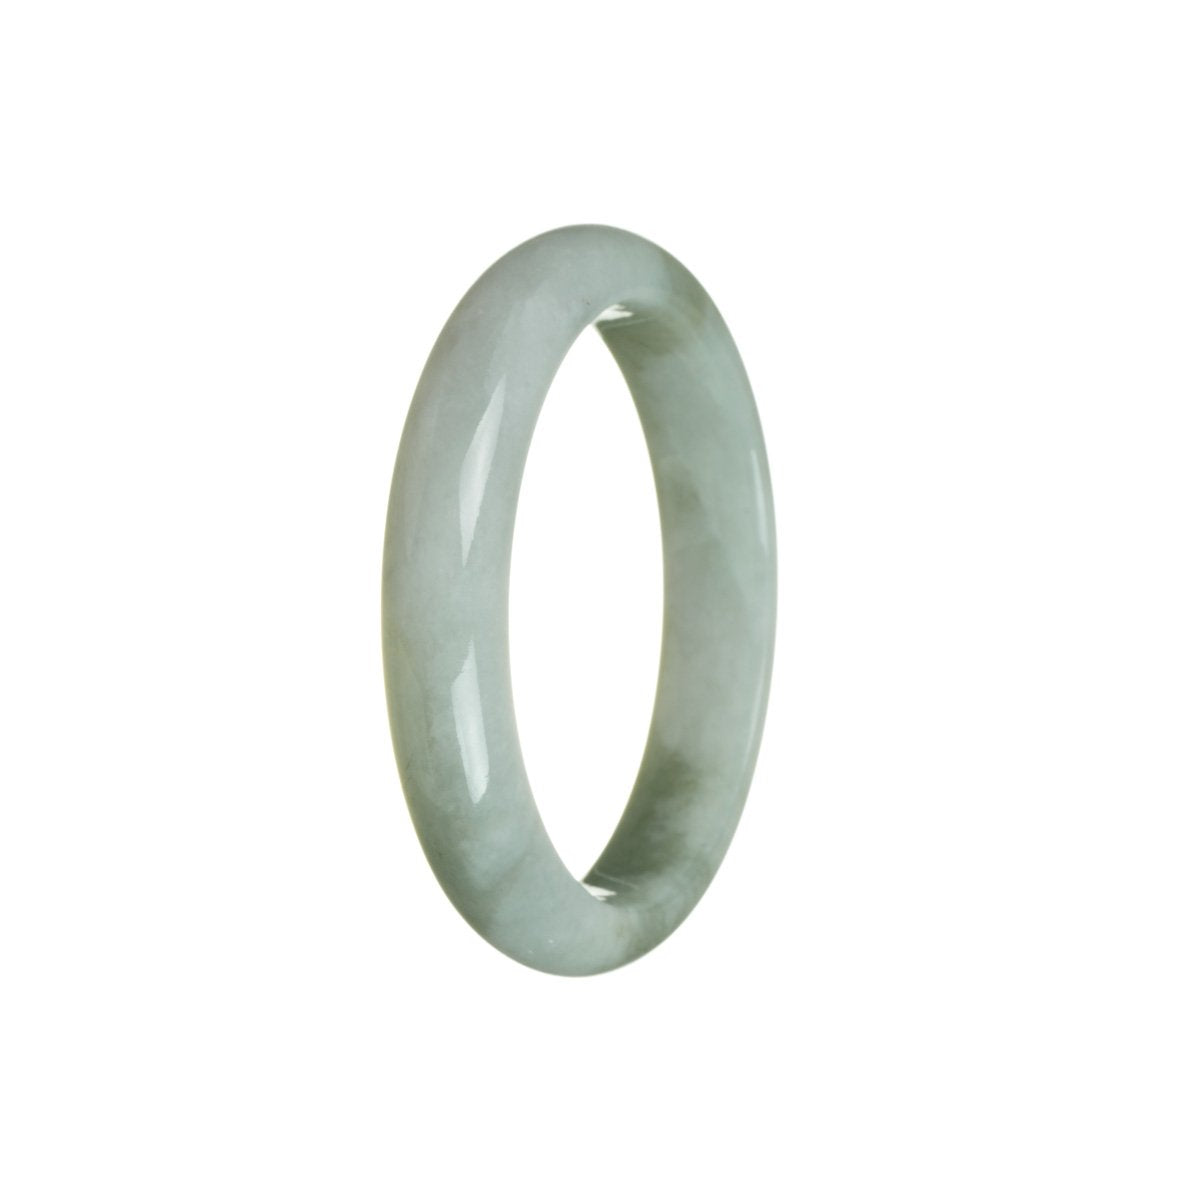 A beautiful half-moon shaped white flower jadeite bangle bracelet, made from genuine grade A jade. Perfect for adding a touch of elegance to any outfit.